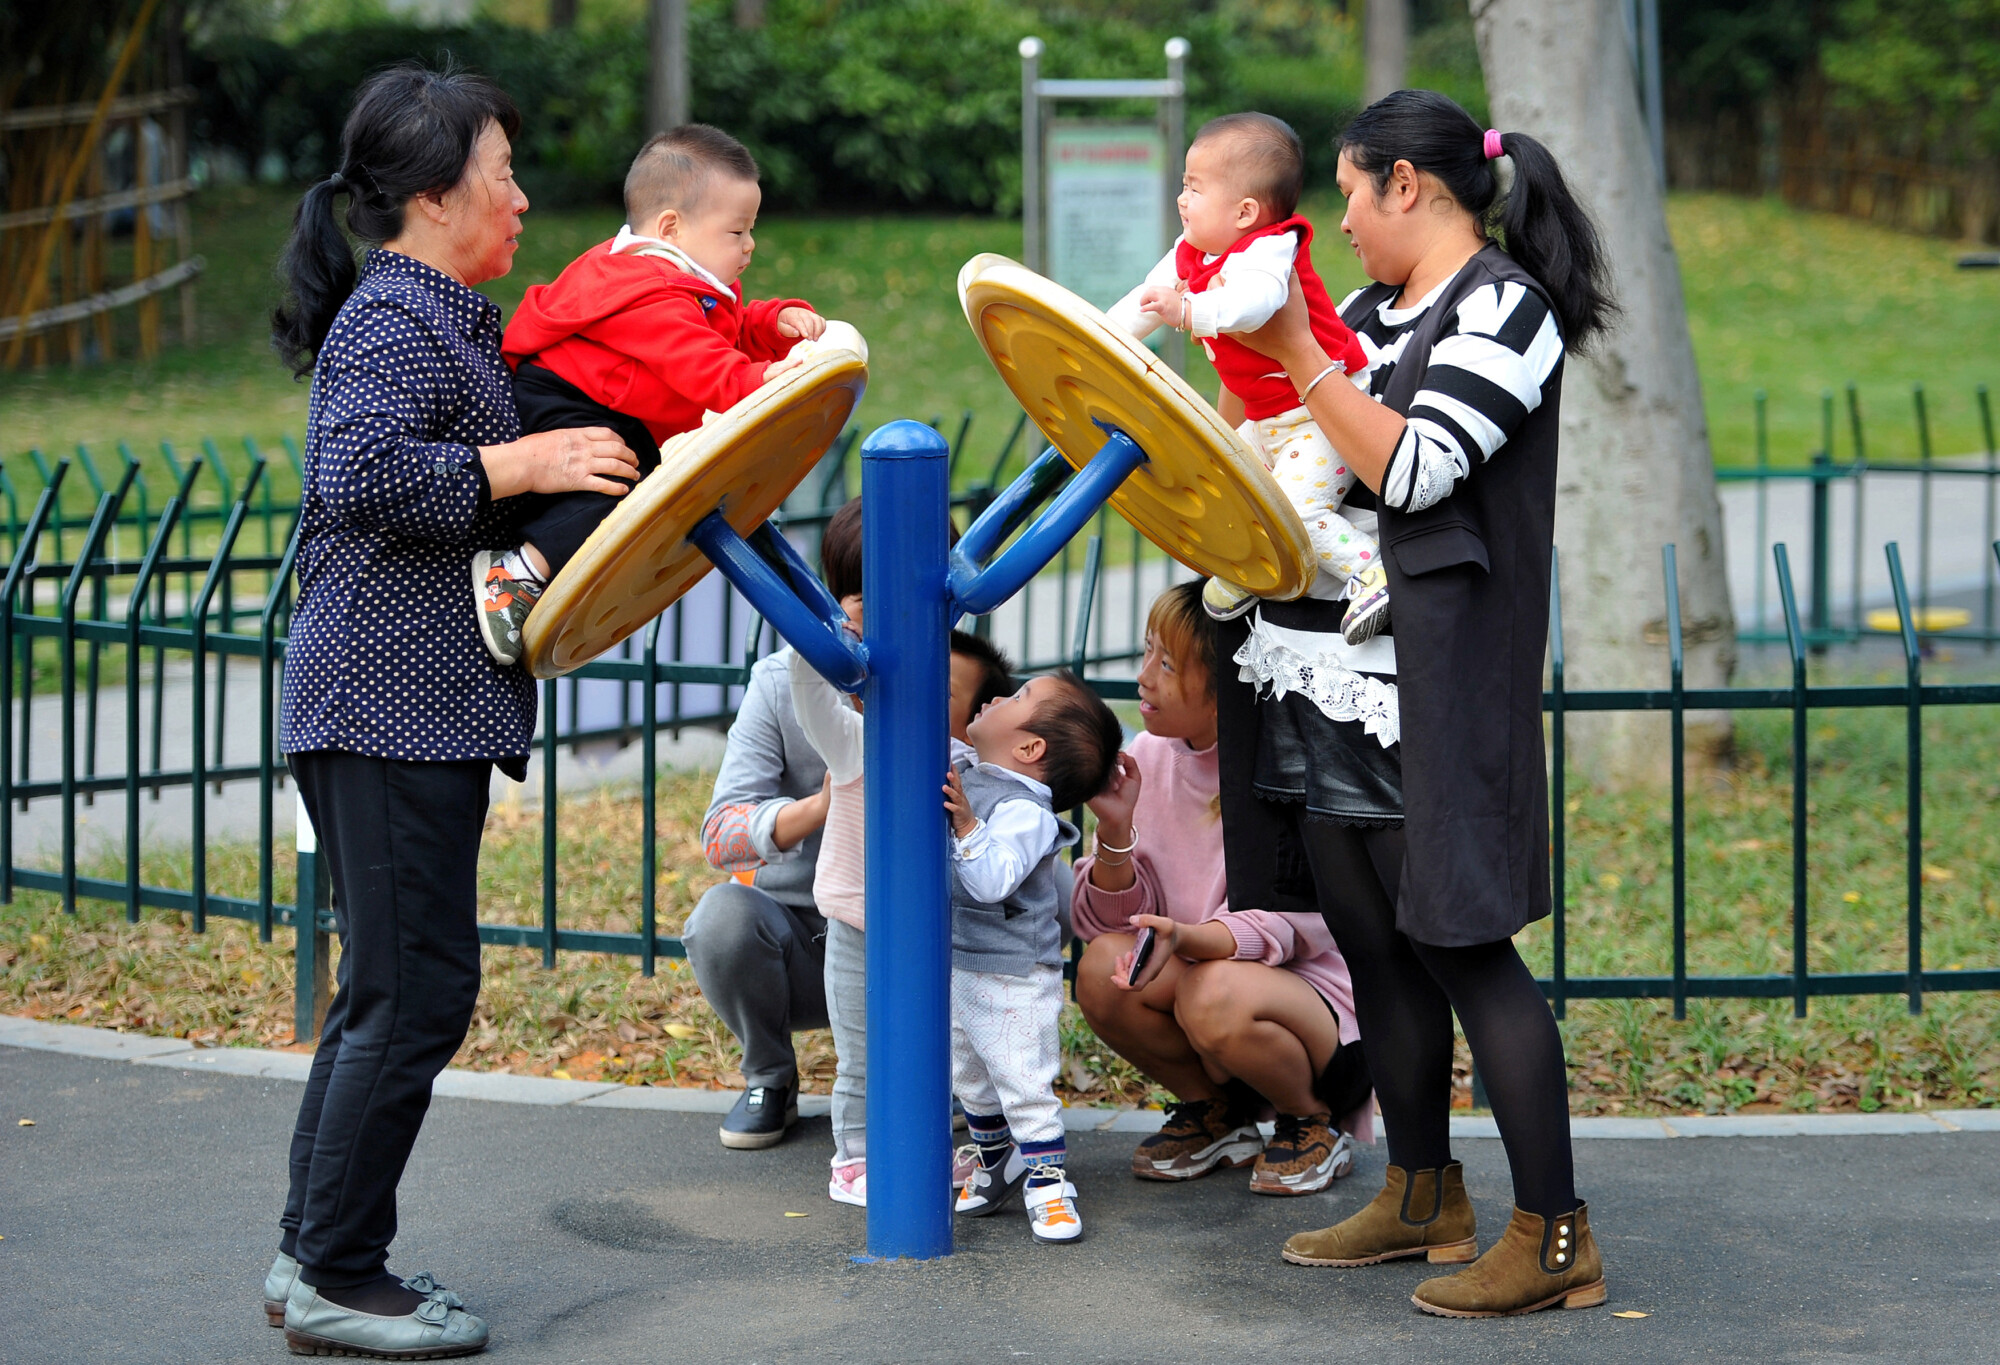 China’s Fertility Rate Could Become Lowest Globally